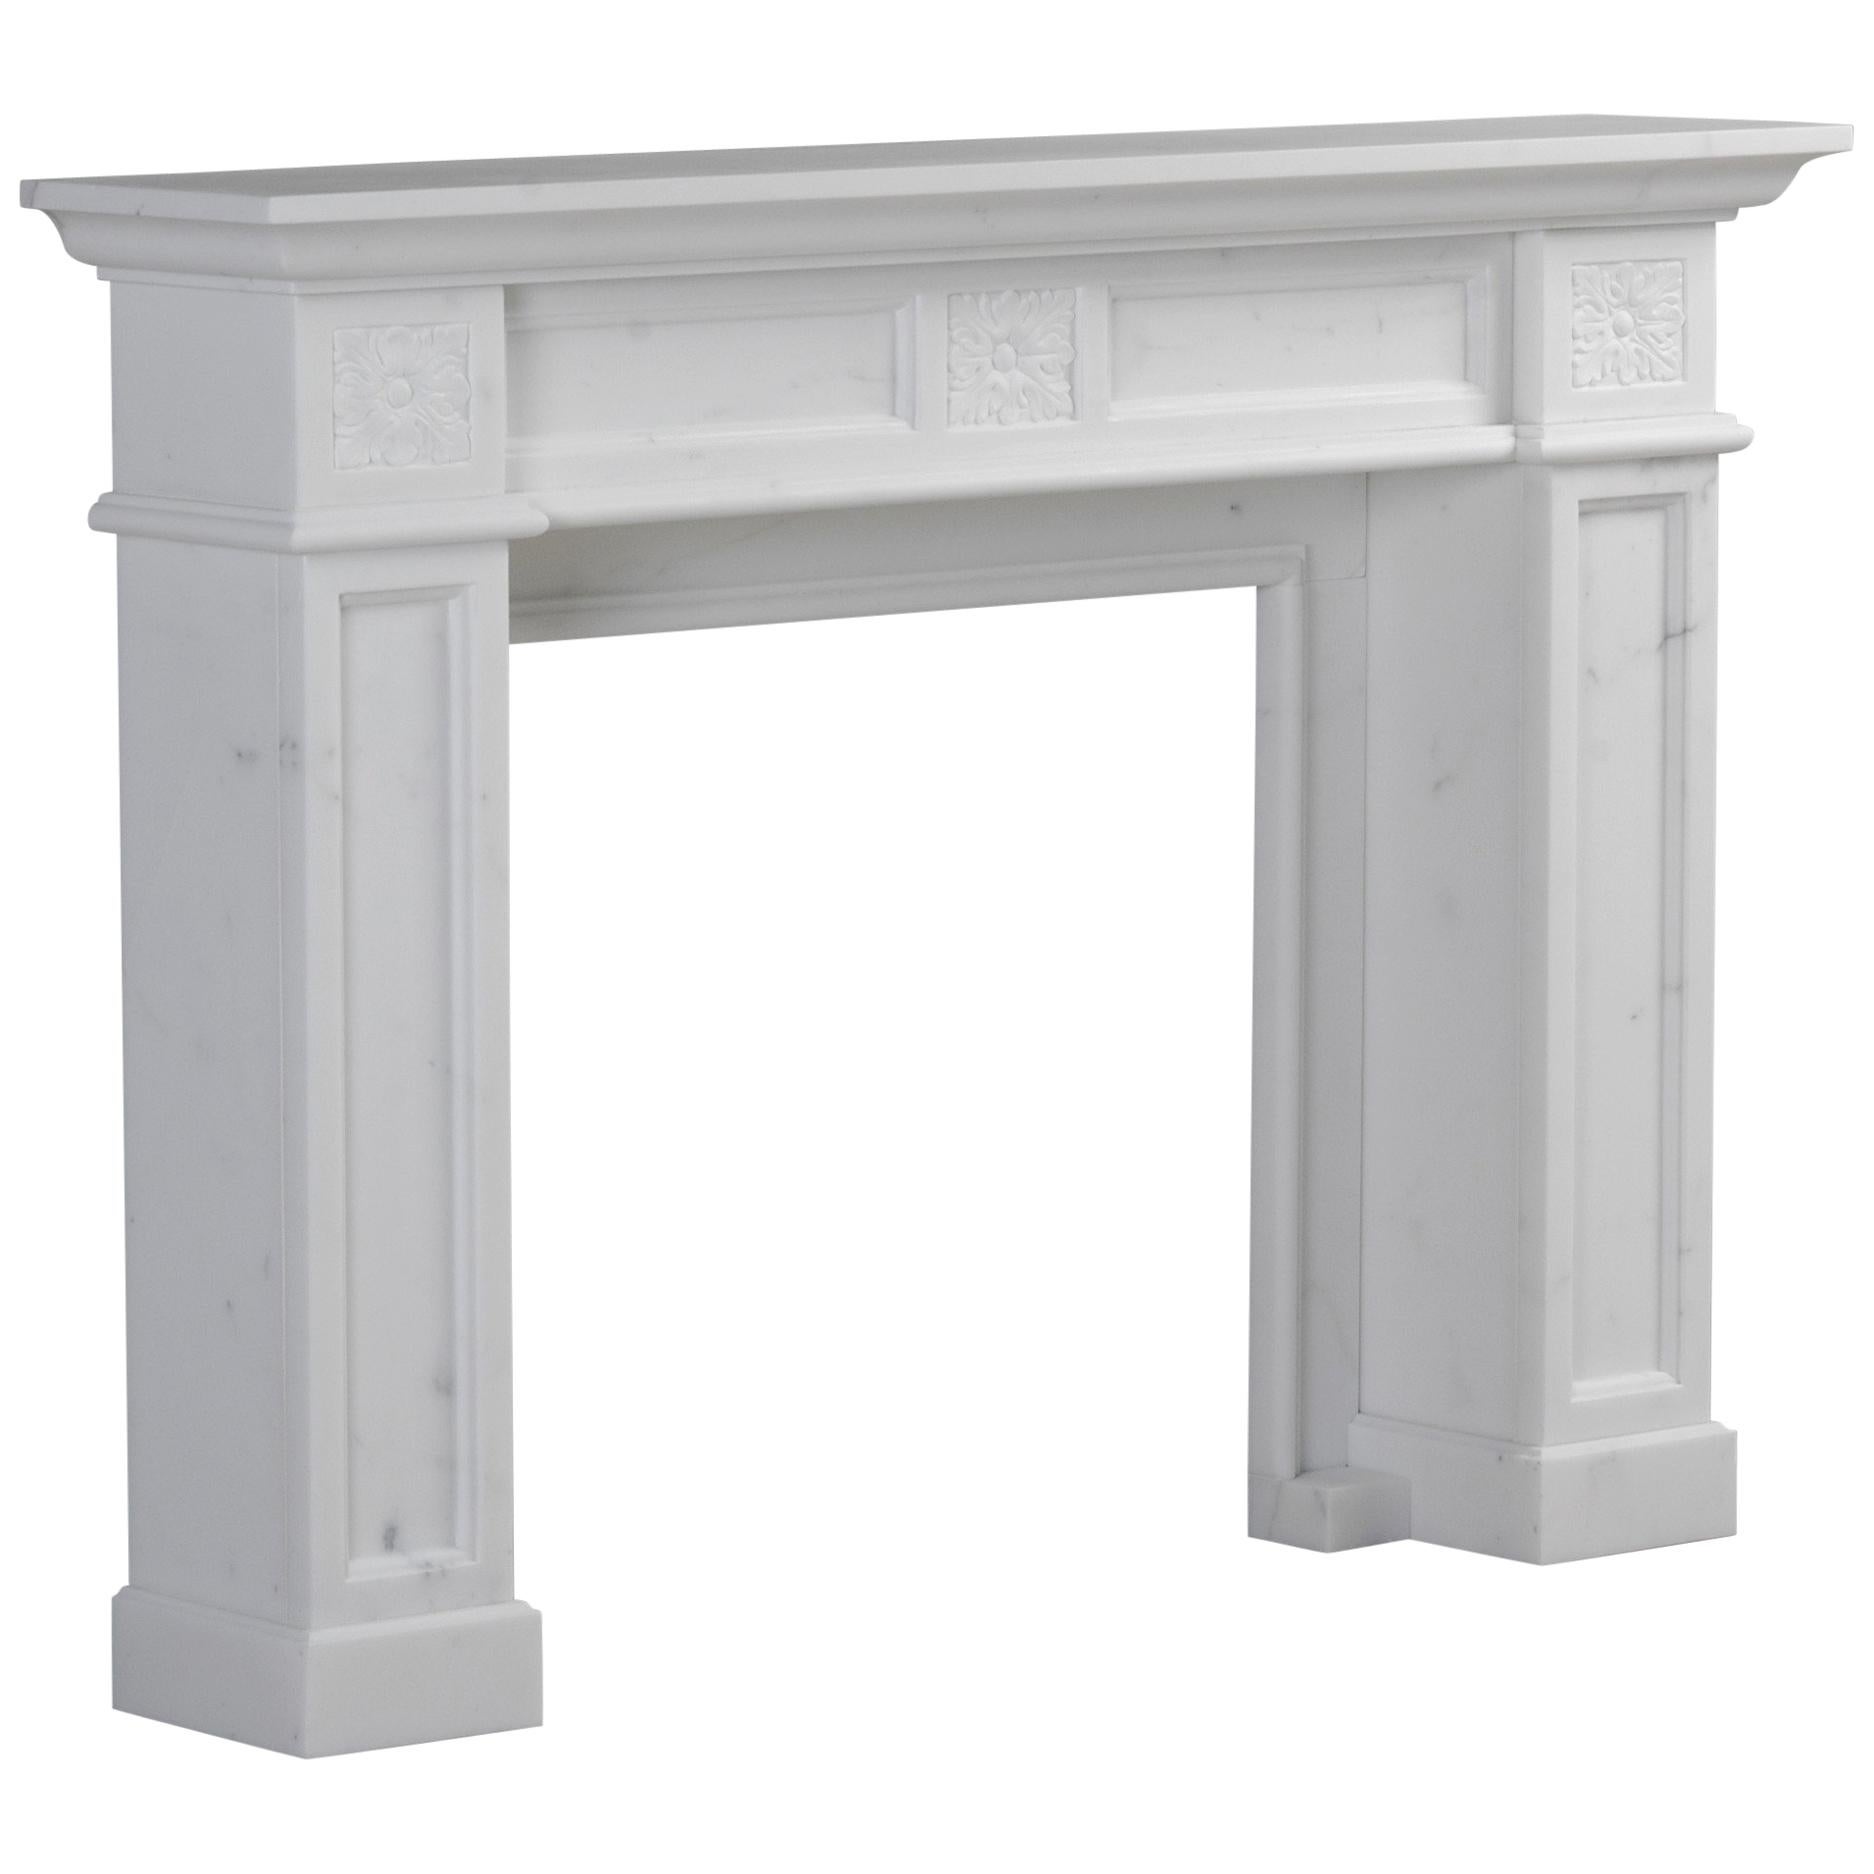 London Fireplace in Bianca Carrara Marble For Sale